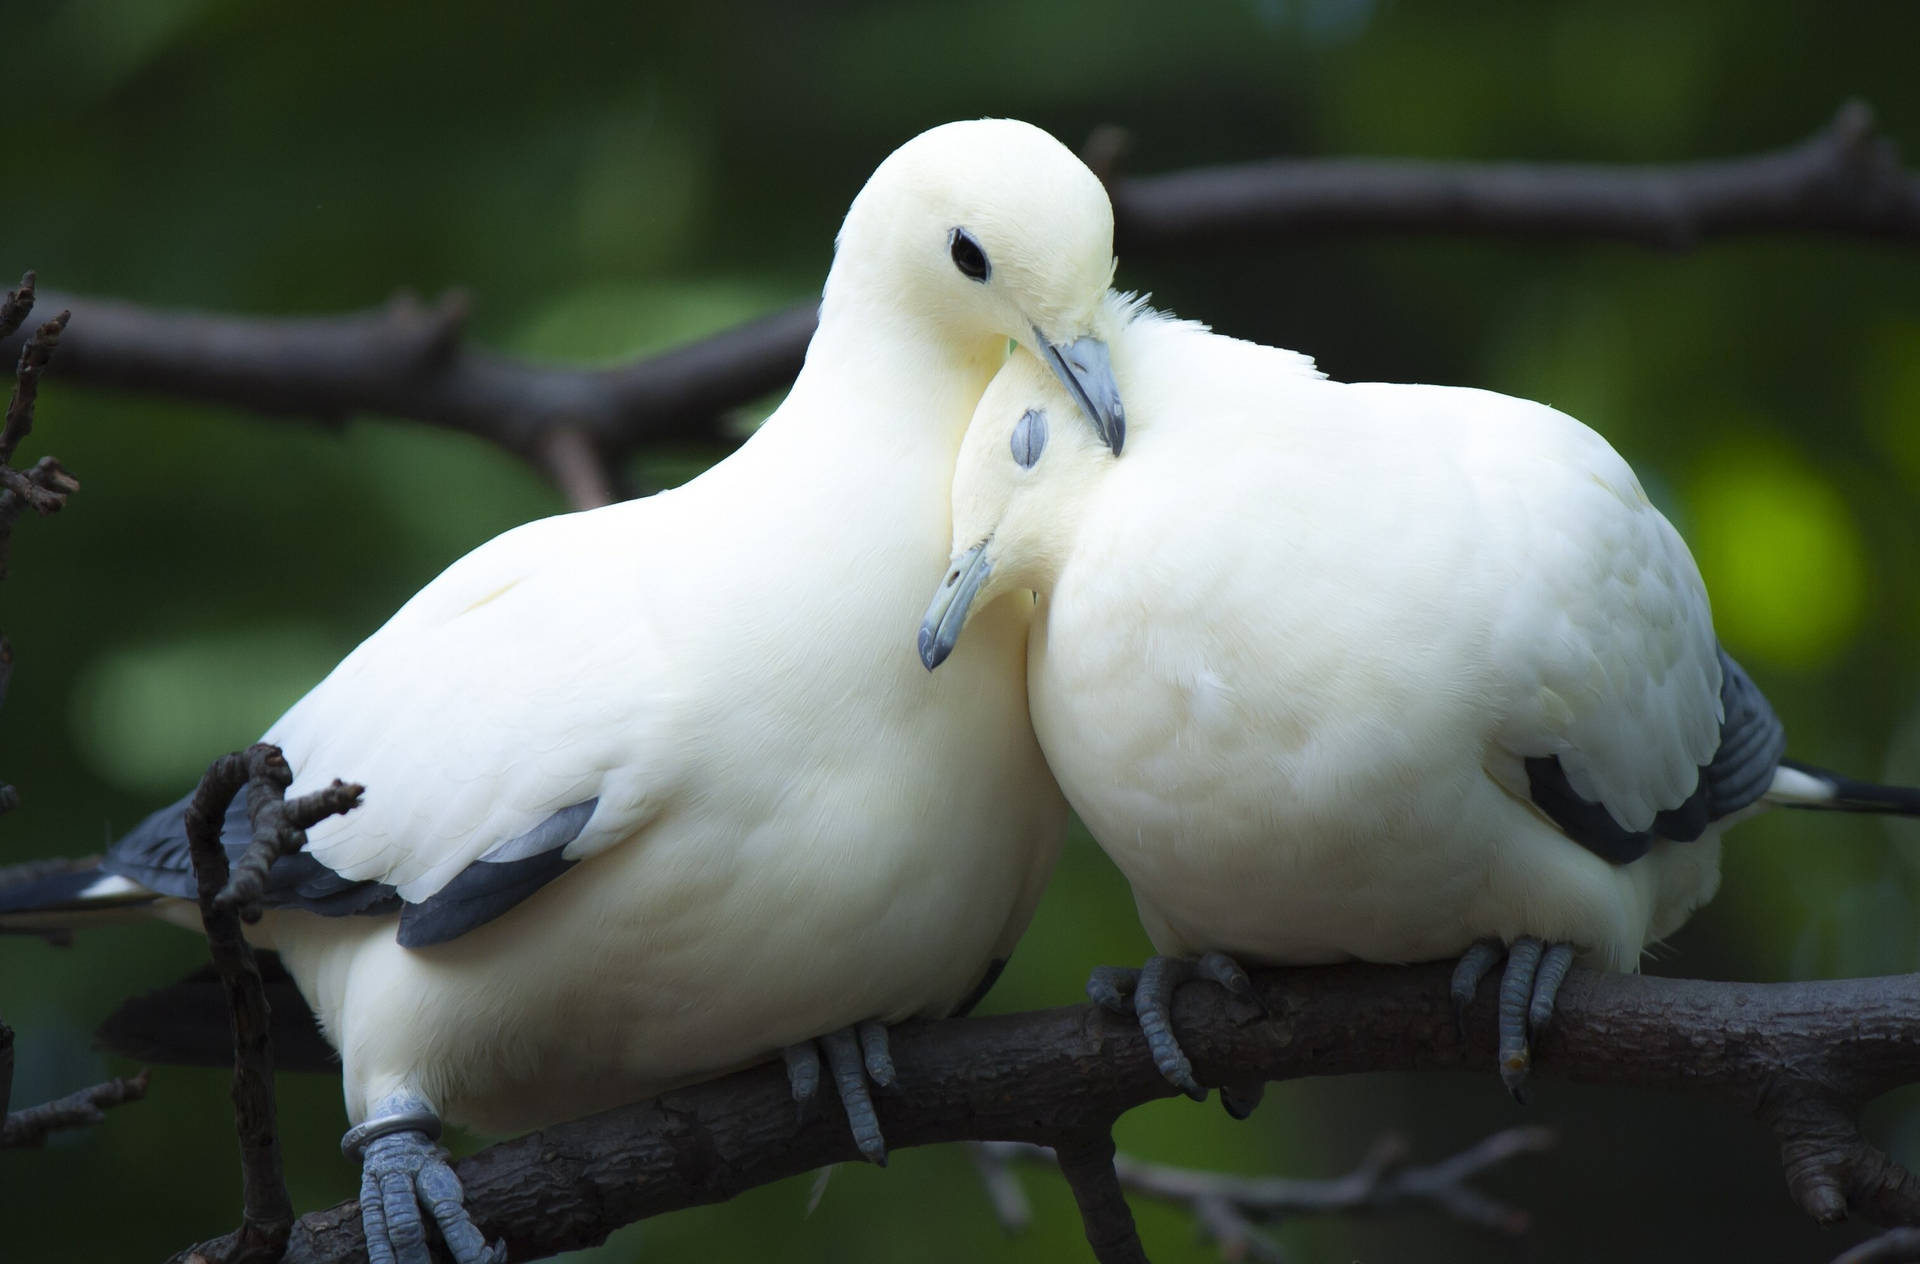 Cuddling White Doves With Black Feathers Wallpaper